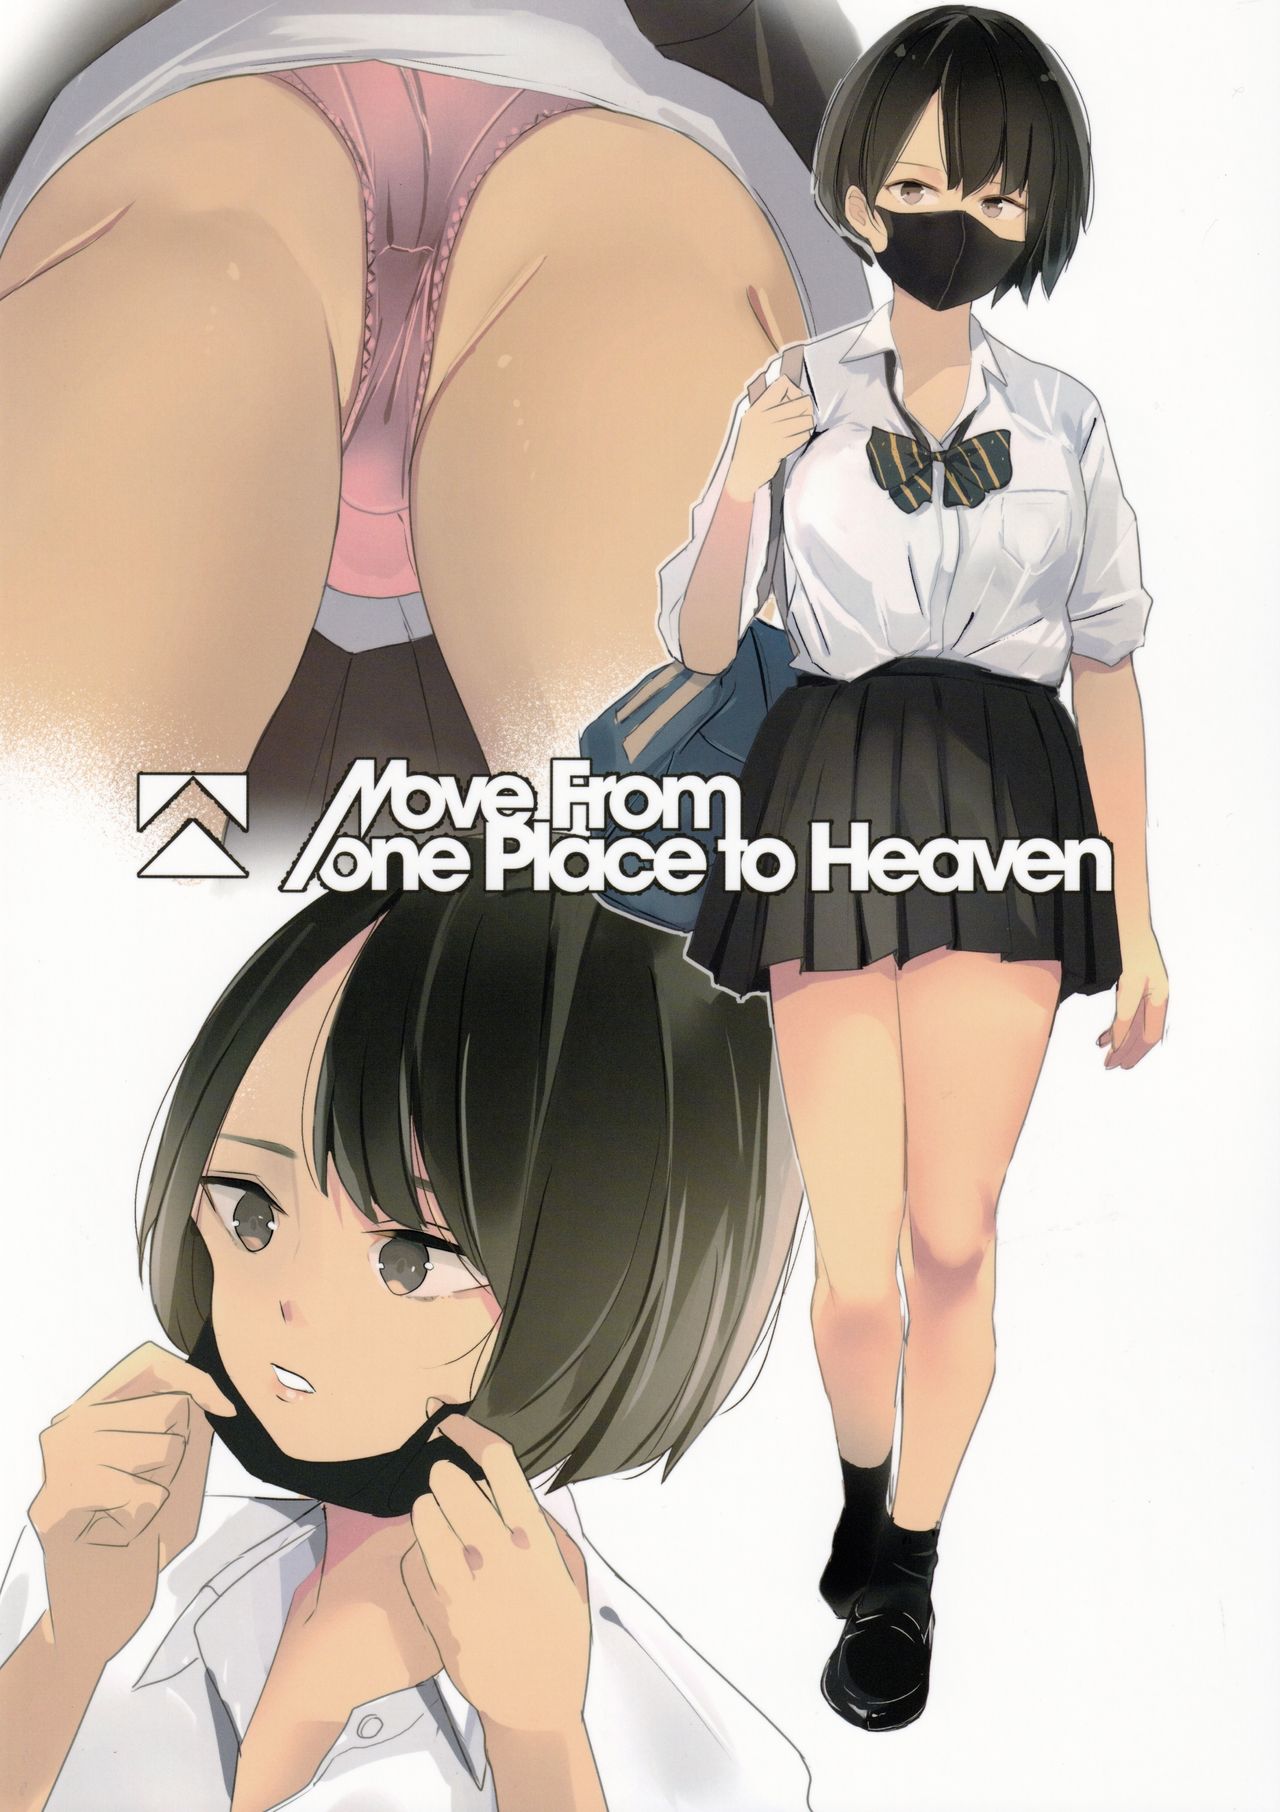 [Move From one Place to Heaven (ウェス・ハートランド・スミス)] アヤちんの汗だく放課後配信